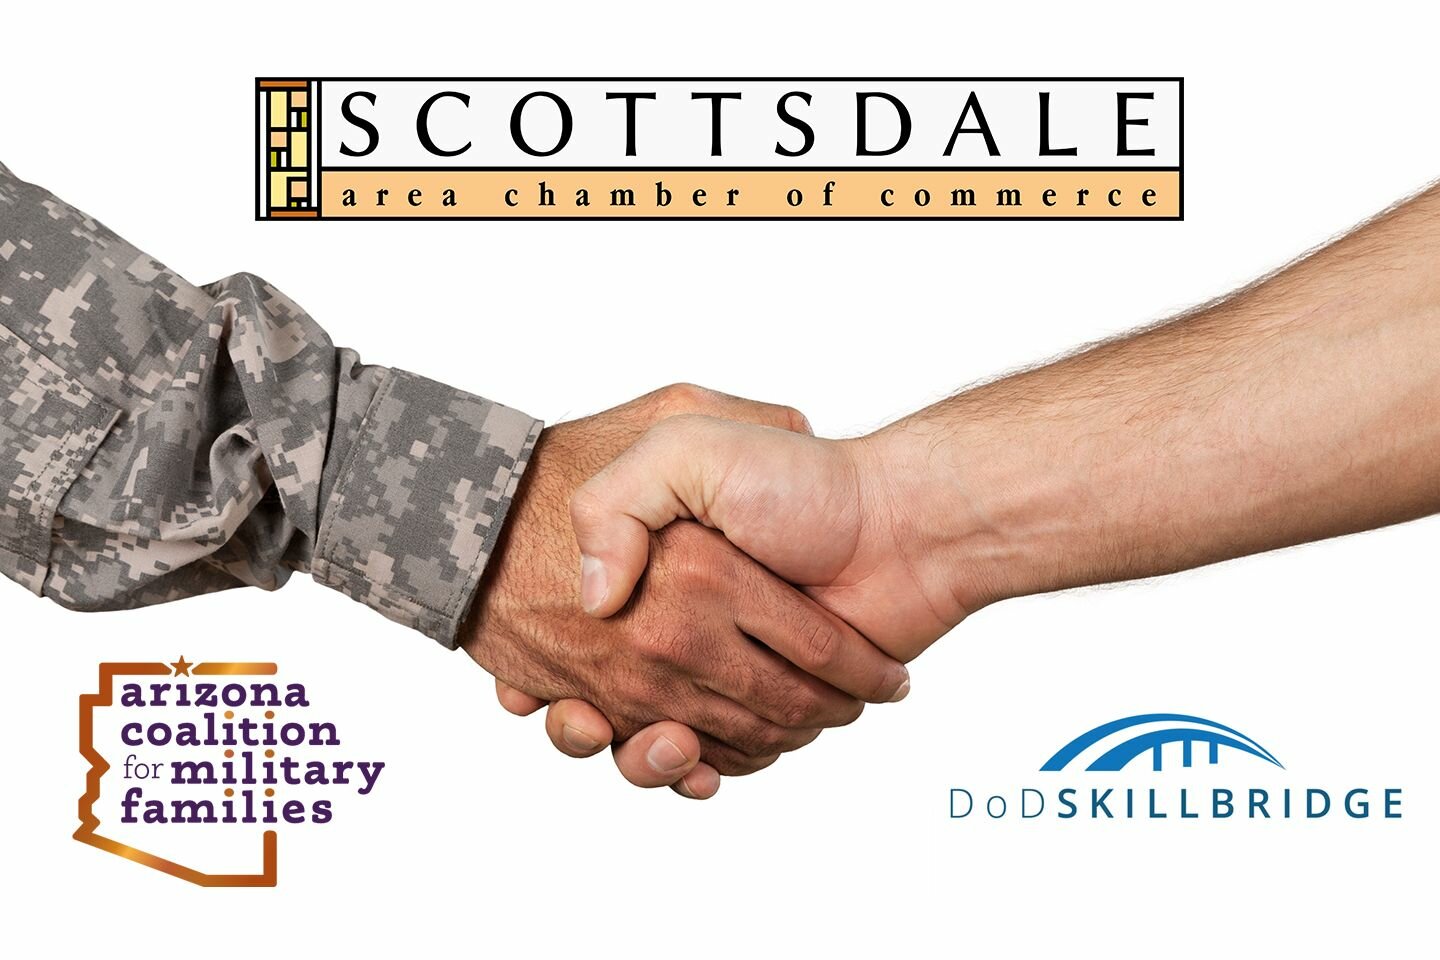 The Scottsdale Area Chamber of Commerce is the largest business organization in Scottsdale providing advocacy, education, networking, leadership development and exposure opportunities to member businesses.